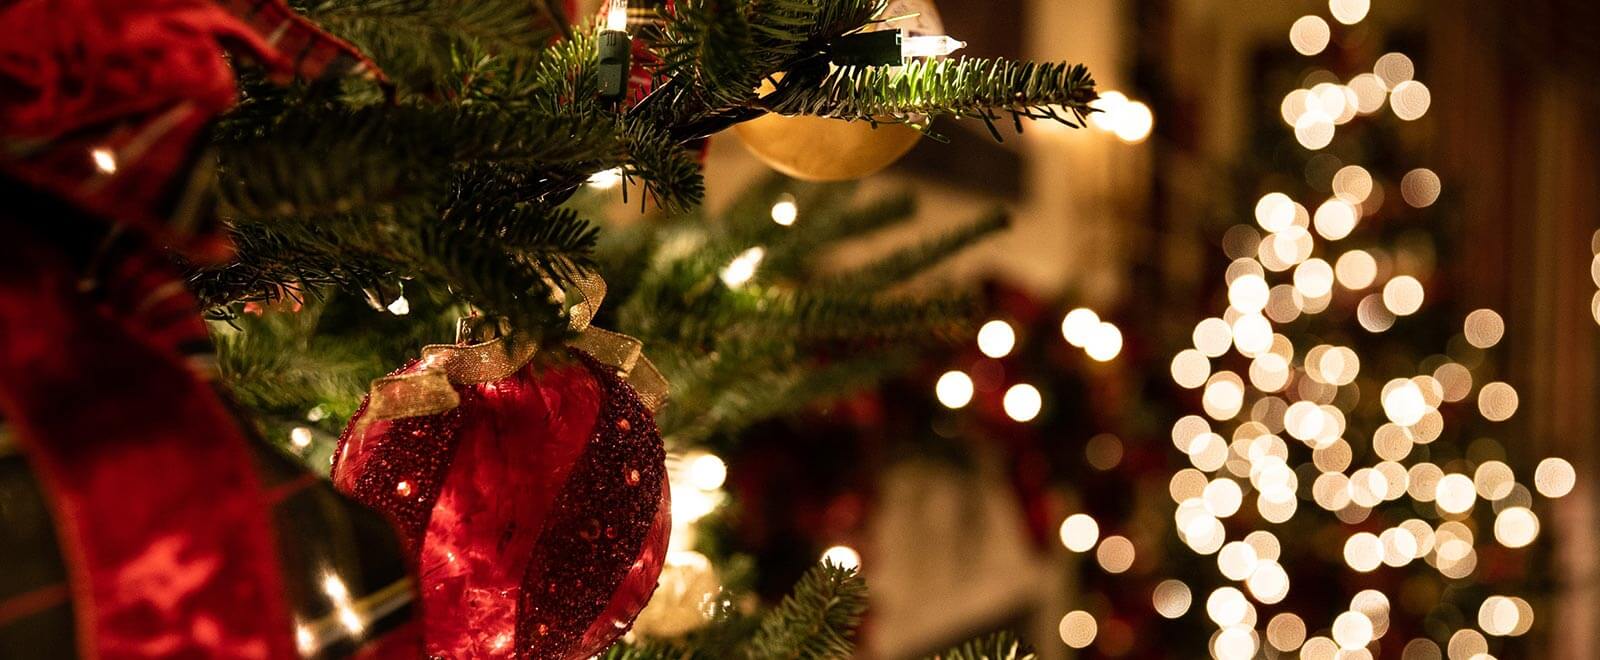 How to Help Ease the Financial Pressures of Christmas and New Years